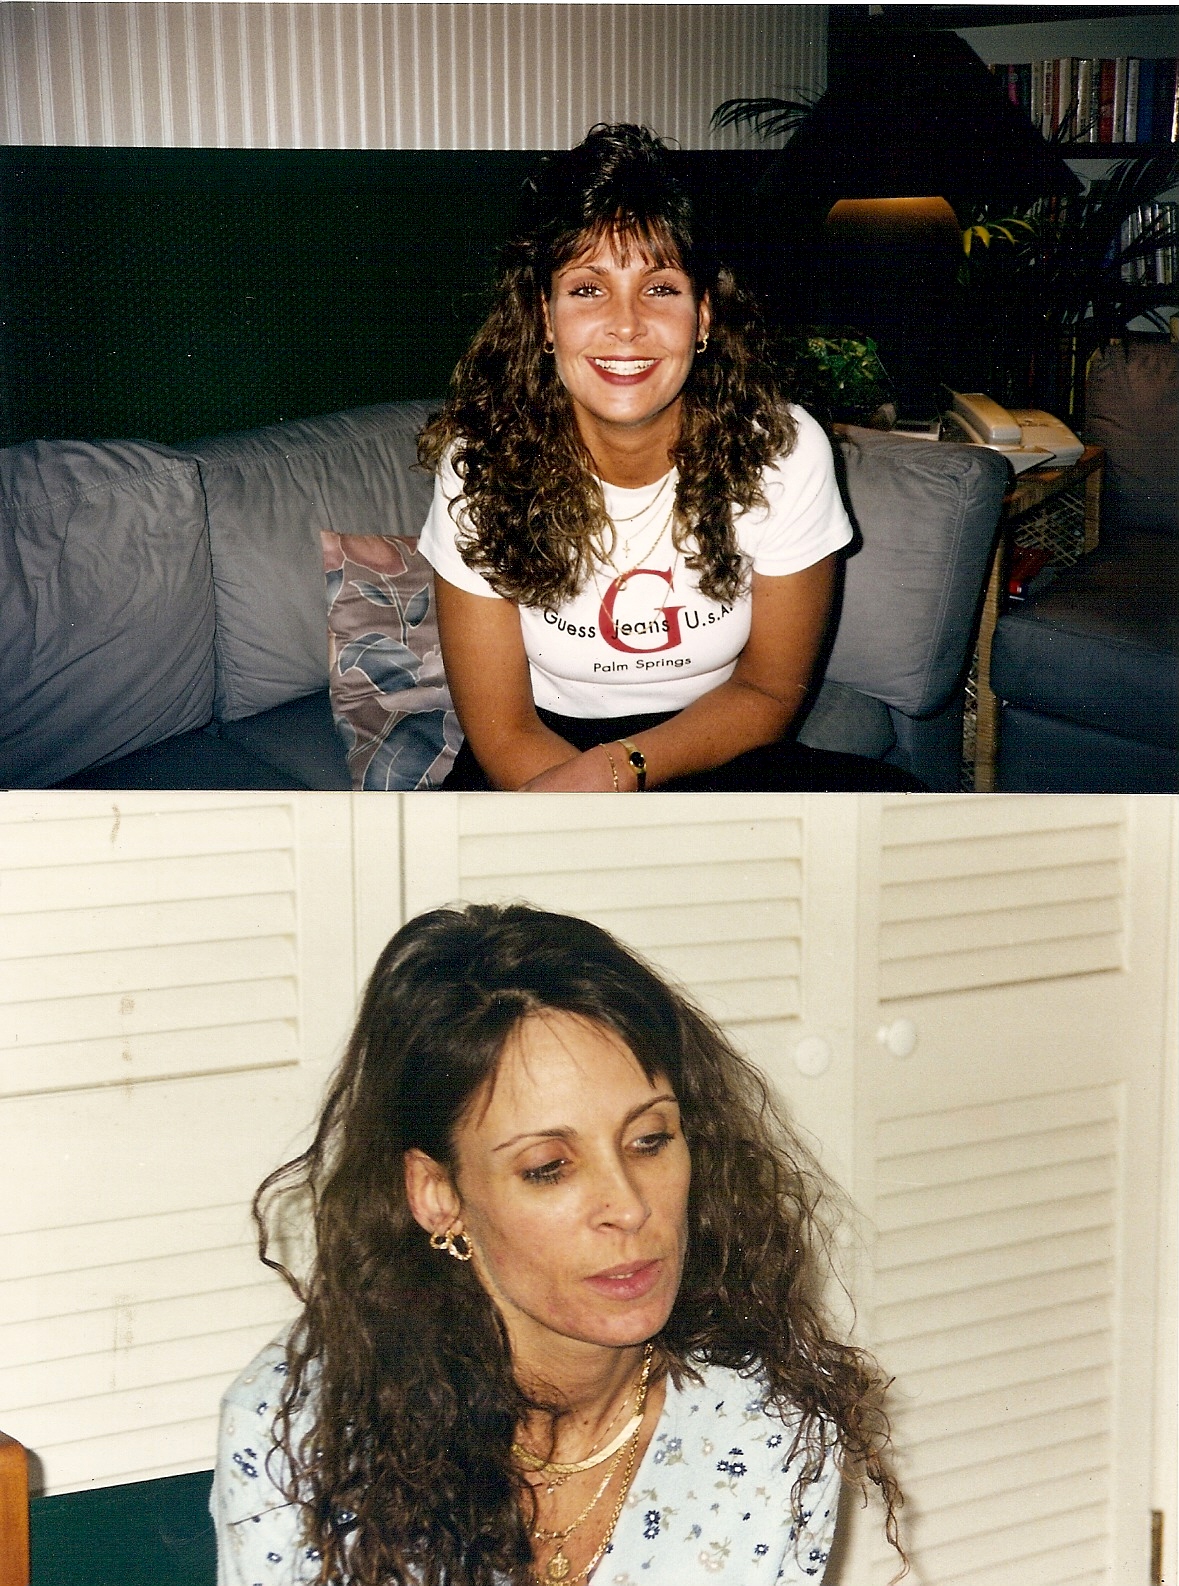 both of these photos of me were taken in 1996!